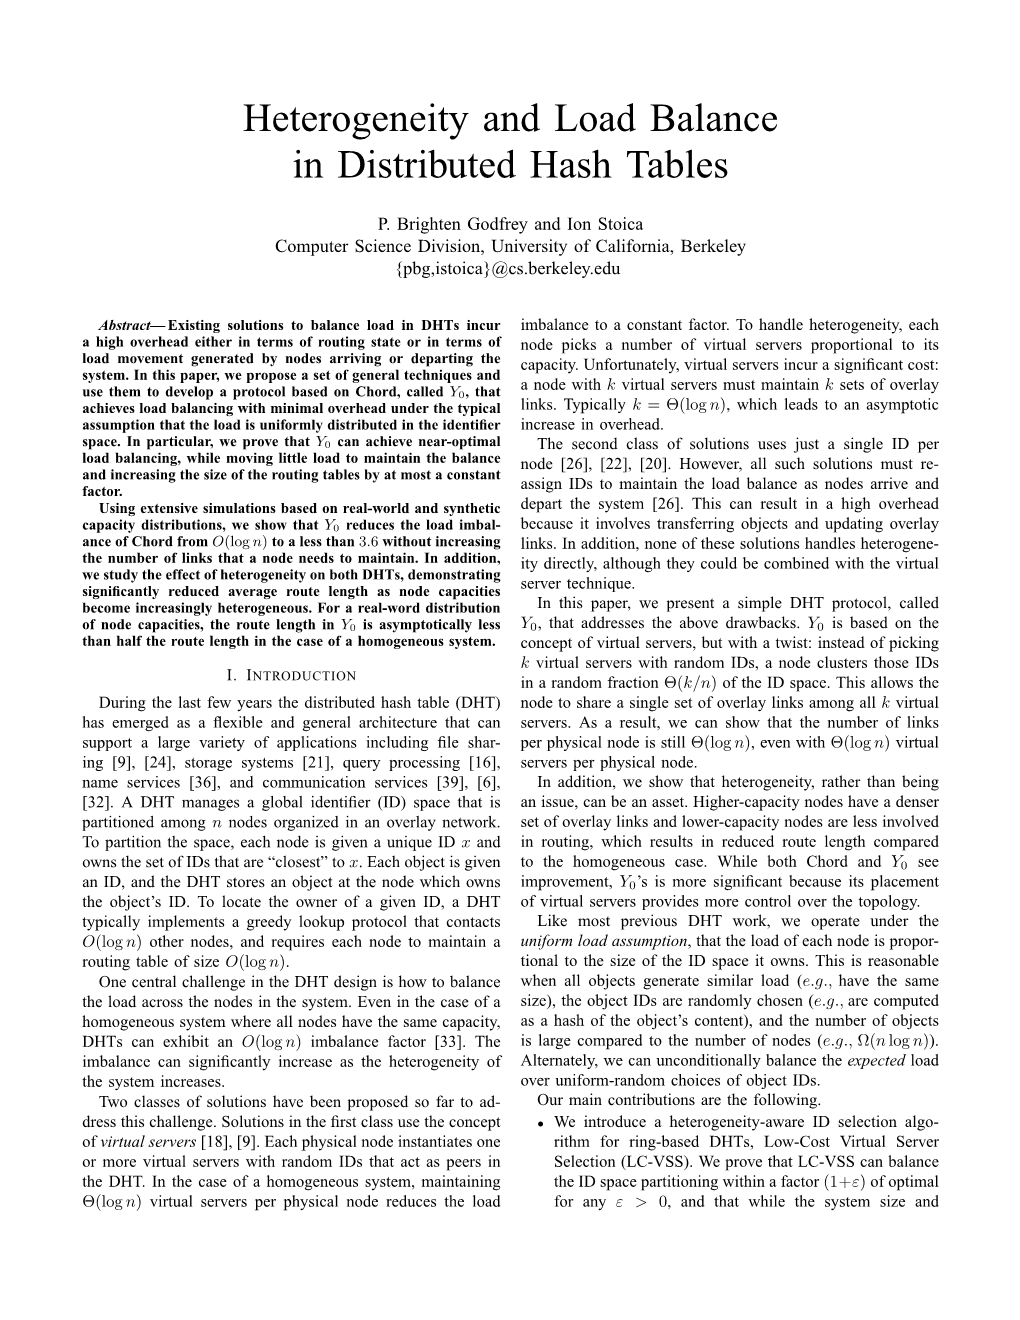 Heterogeneity and Load Balance in Distributed Hash Tables